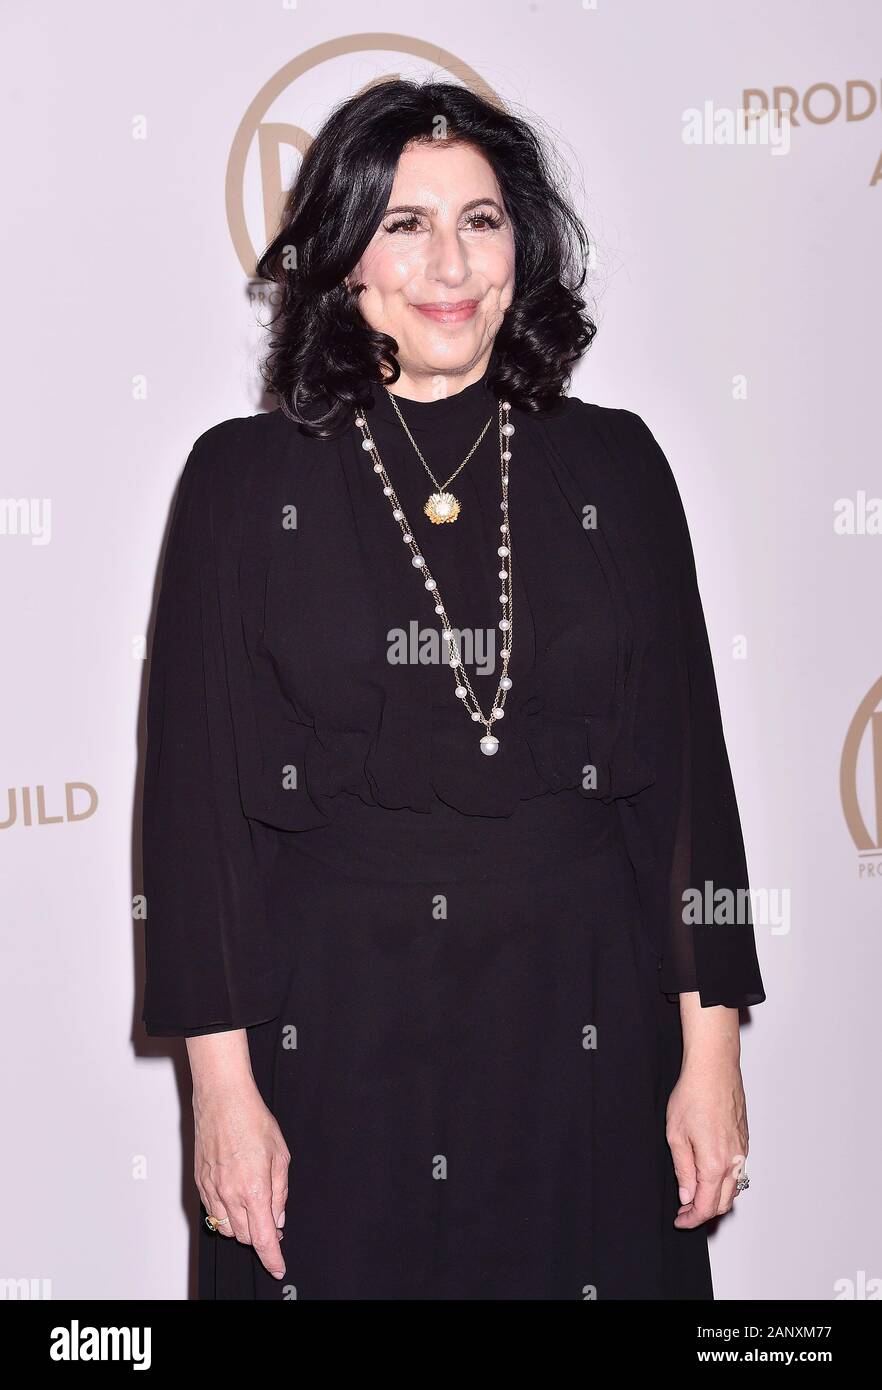 HOLLYWOOD, CA - JANUARY 18: Sue Kroll attends the 31st Annual Producers Guild Awards at the Hollywood Palladium on January 18, 2020 in Los Angeles, California. Stock Photo